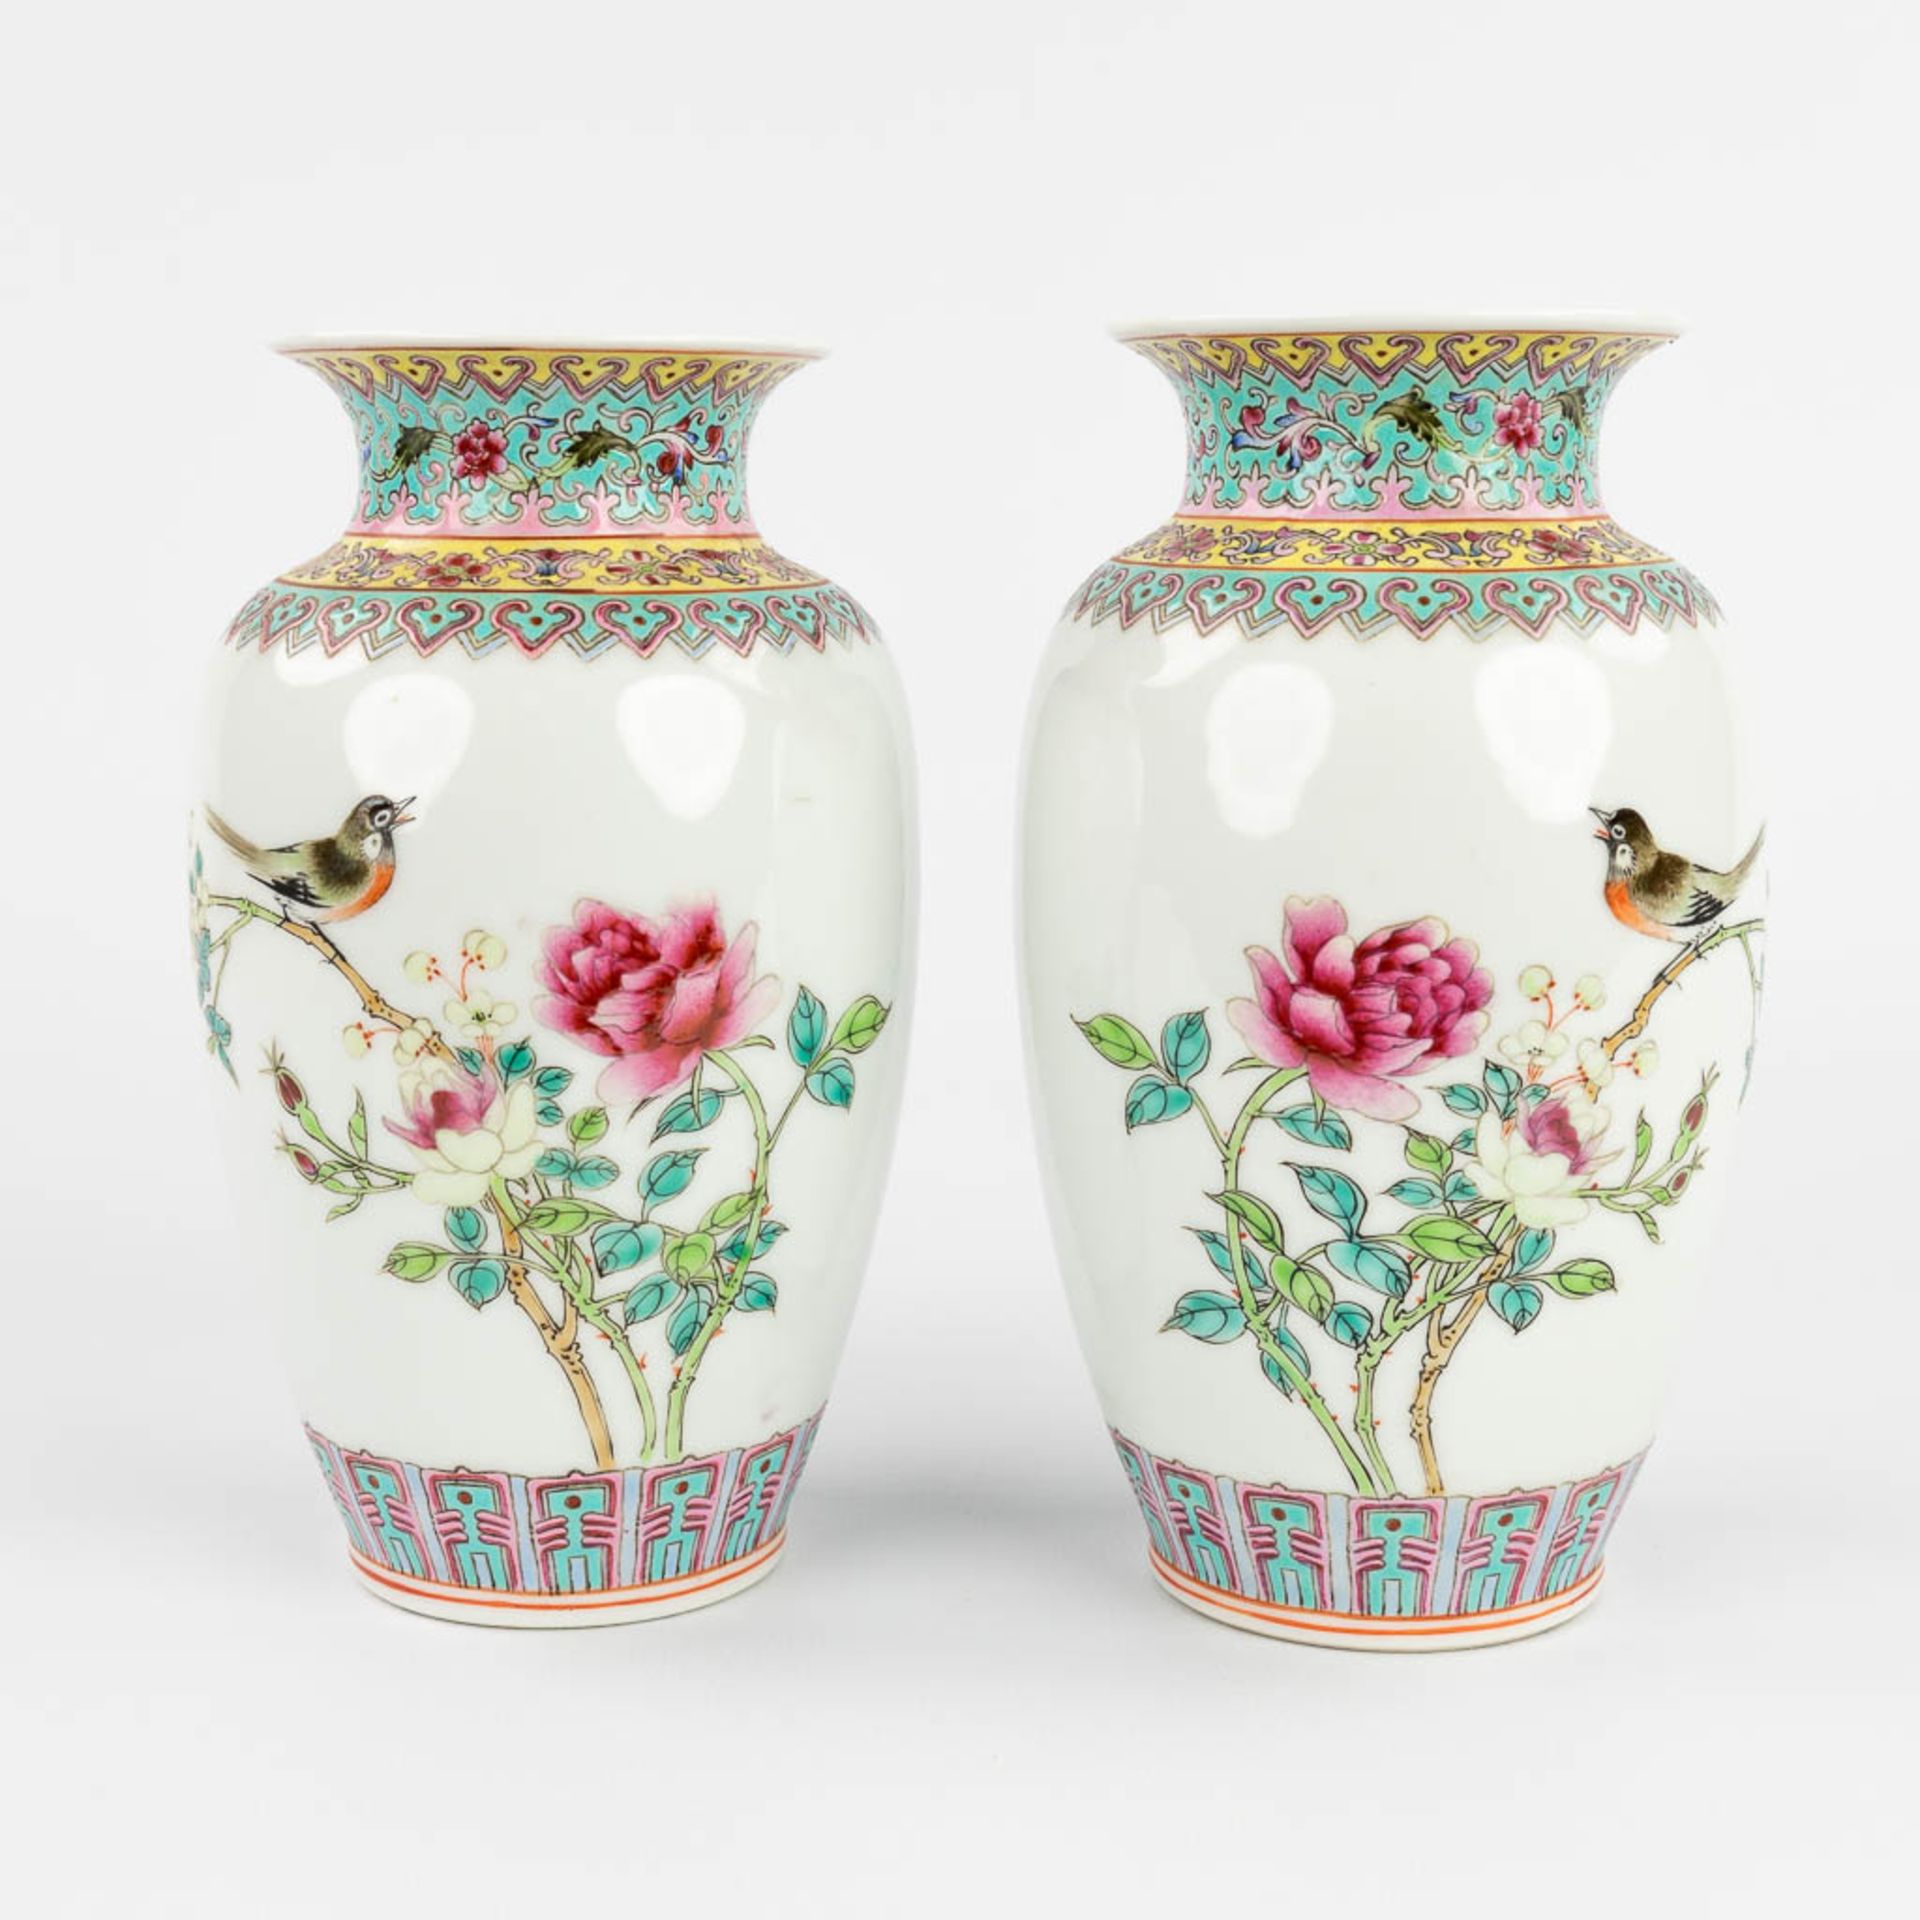 A pair of young Chinese vases decorated with fauna and flora. 20th C. (H:17,5 cm)